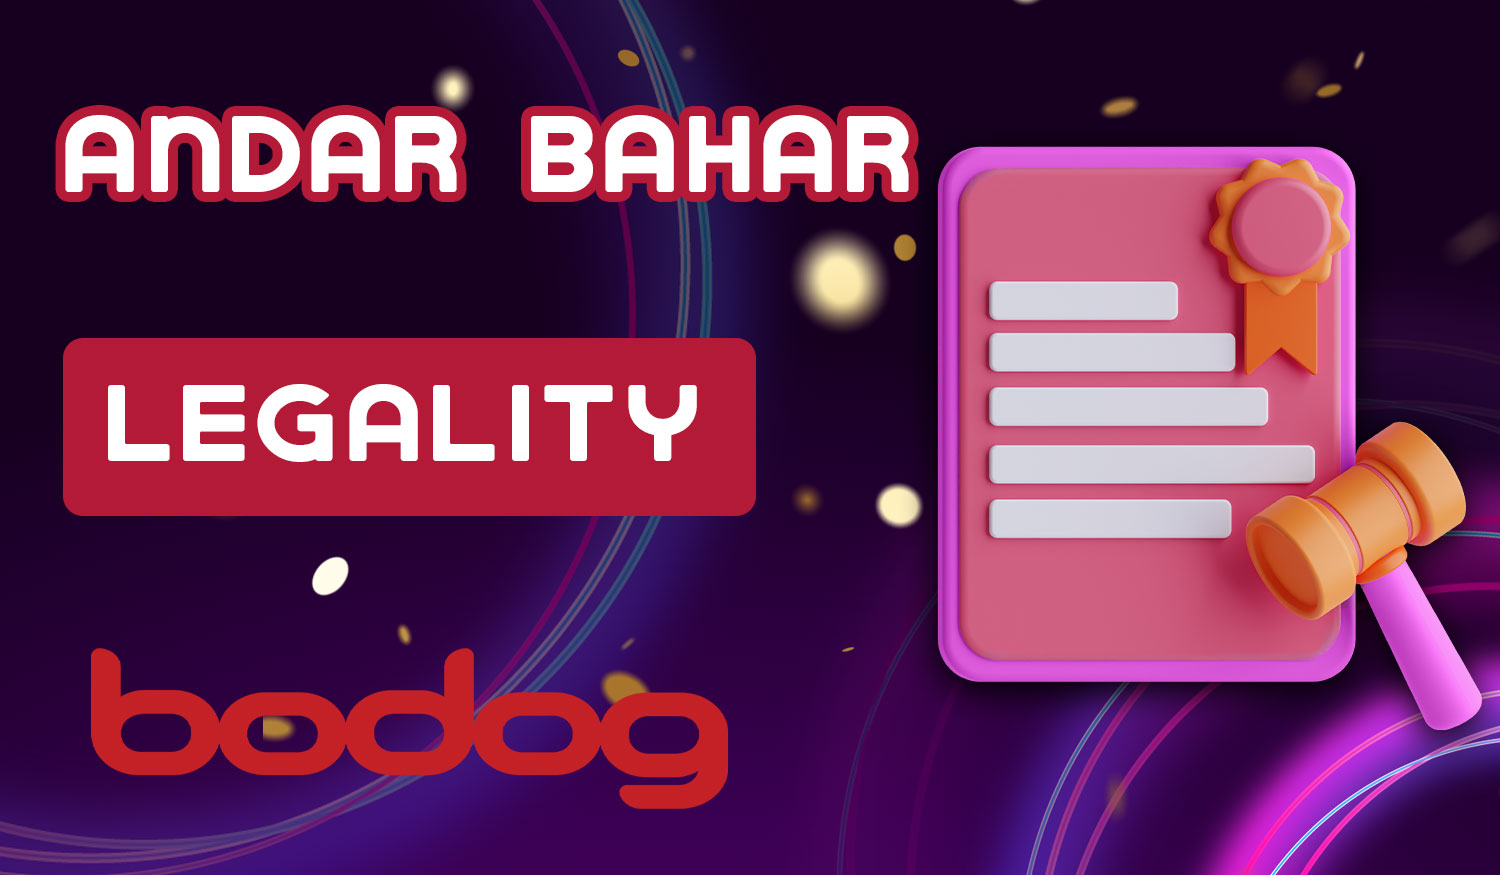 Bodog is fully legal in India